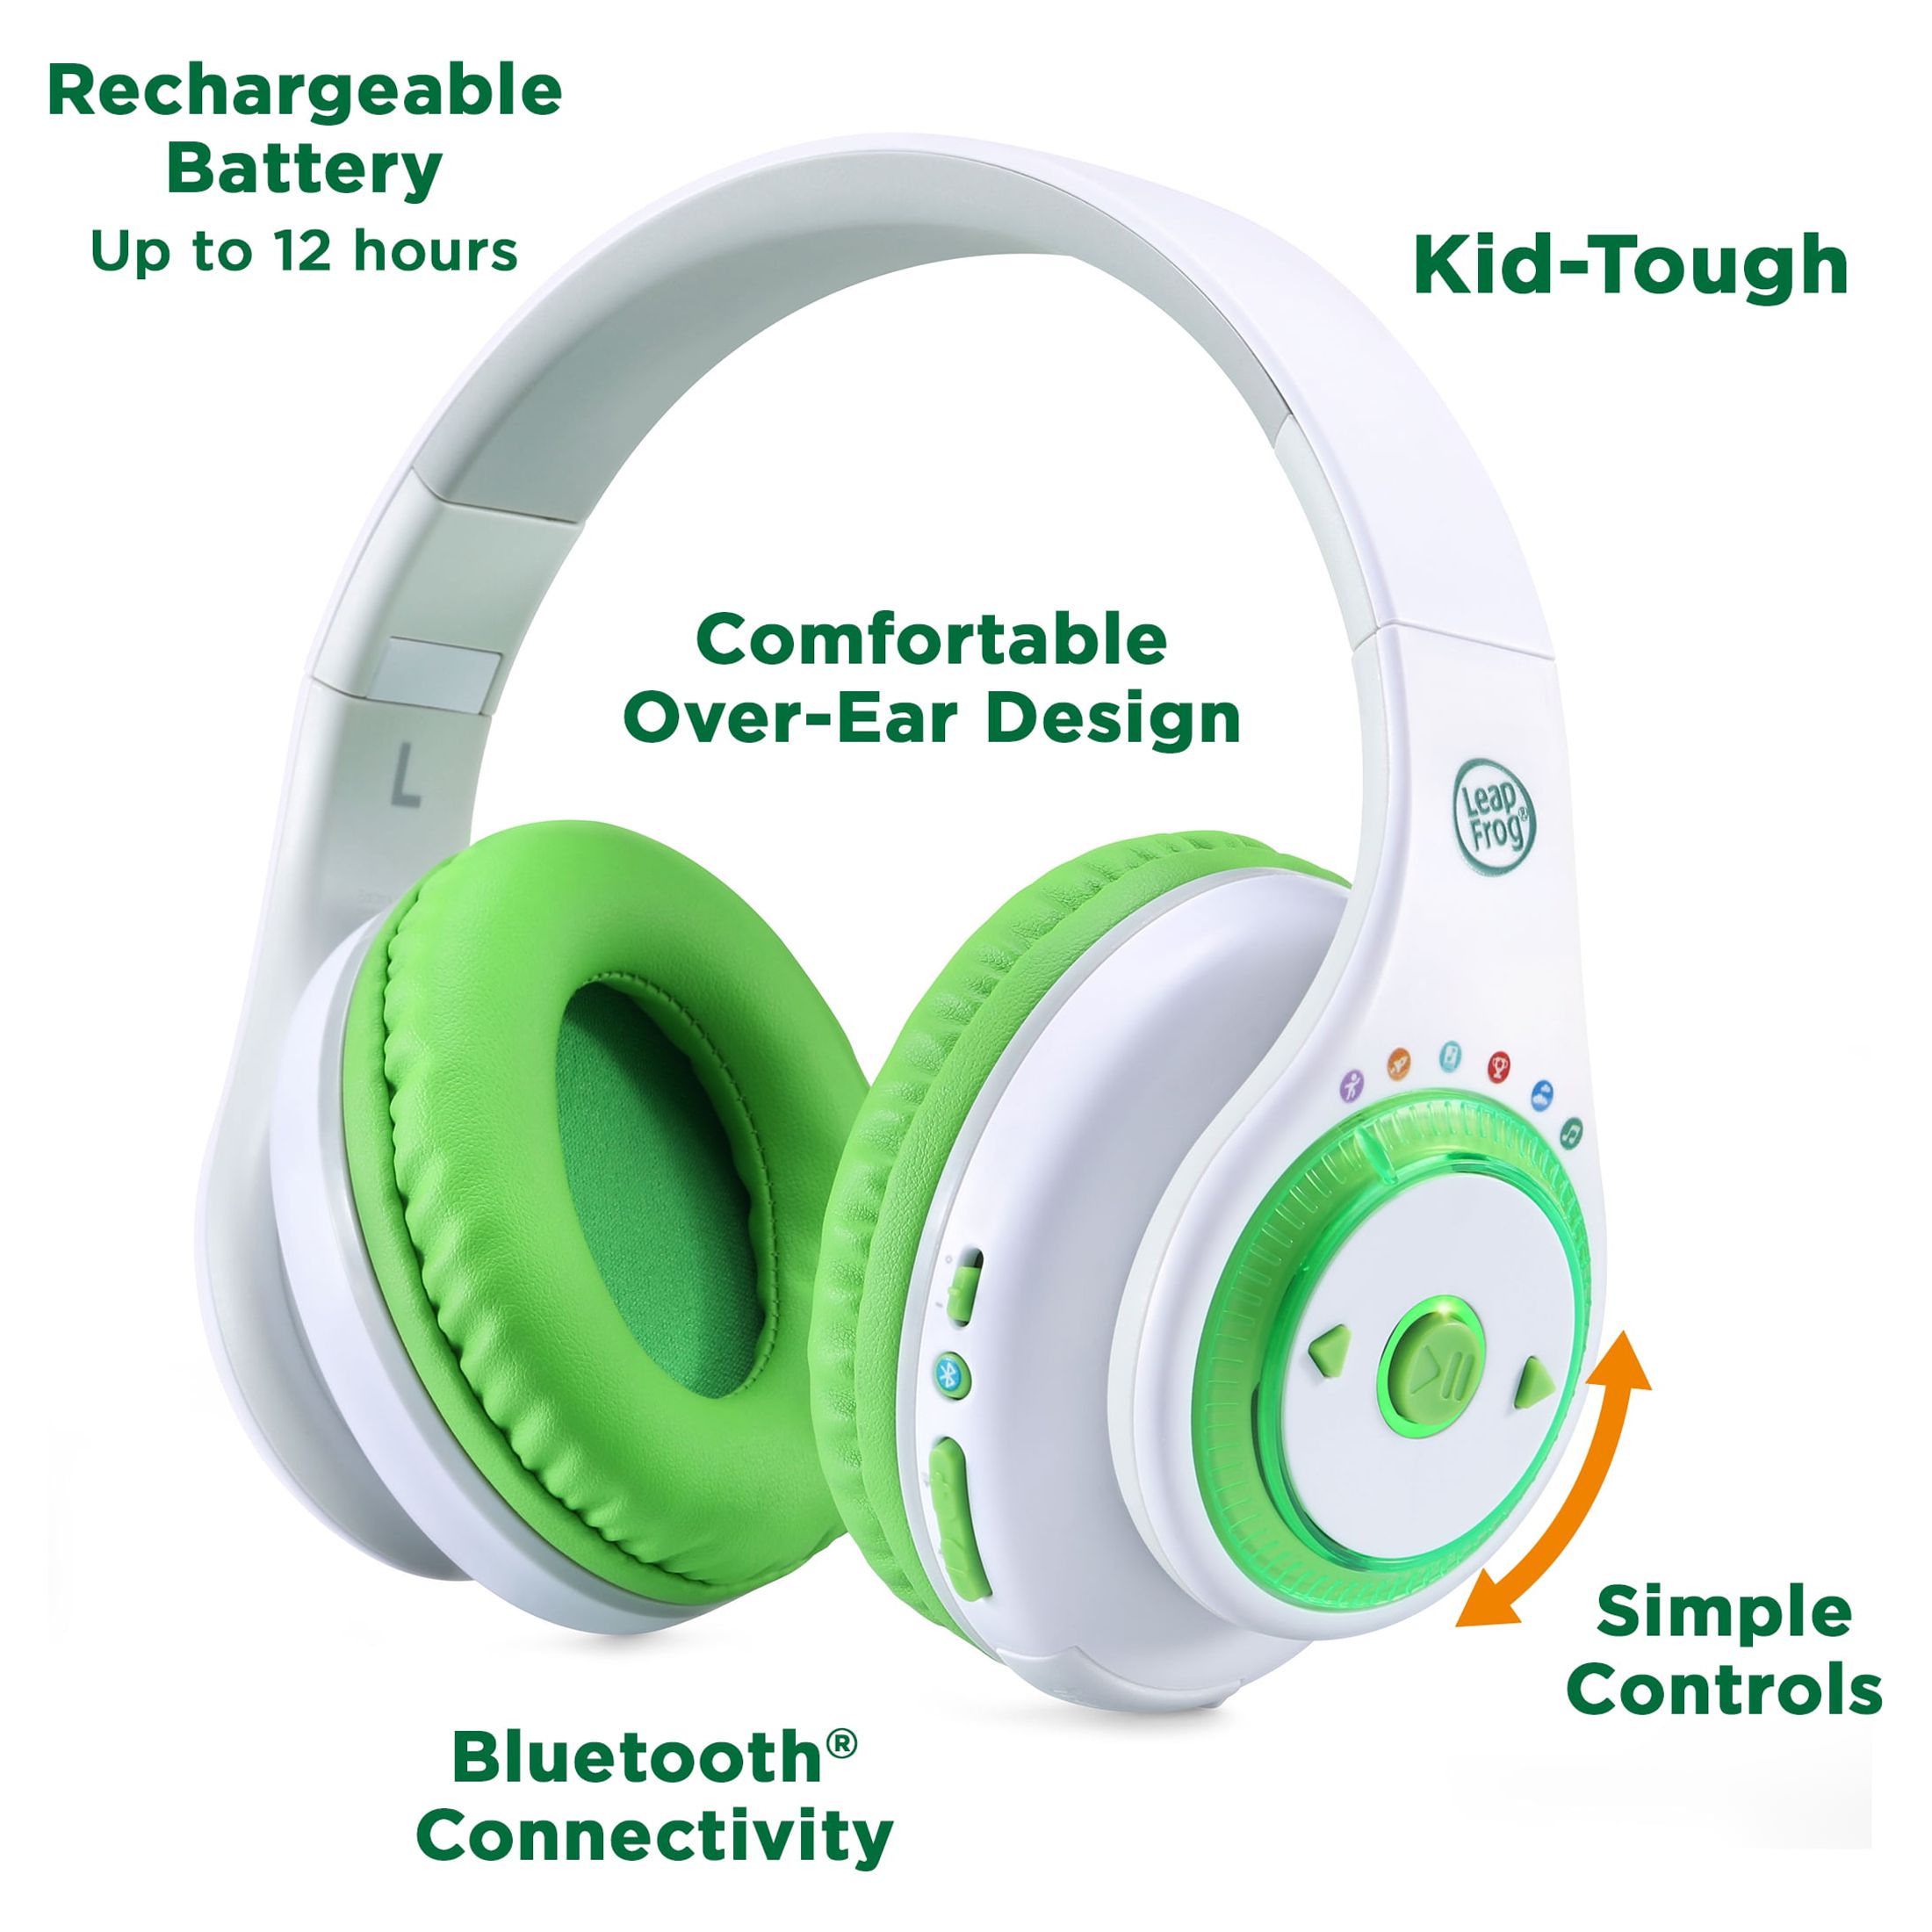 LeapPods Max™ Over-Ear Headphones for Kids, LeapFrog, Encourage Mindfulness, Imaginative Play - image 4 of 11